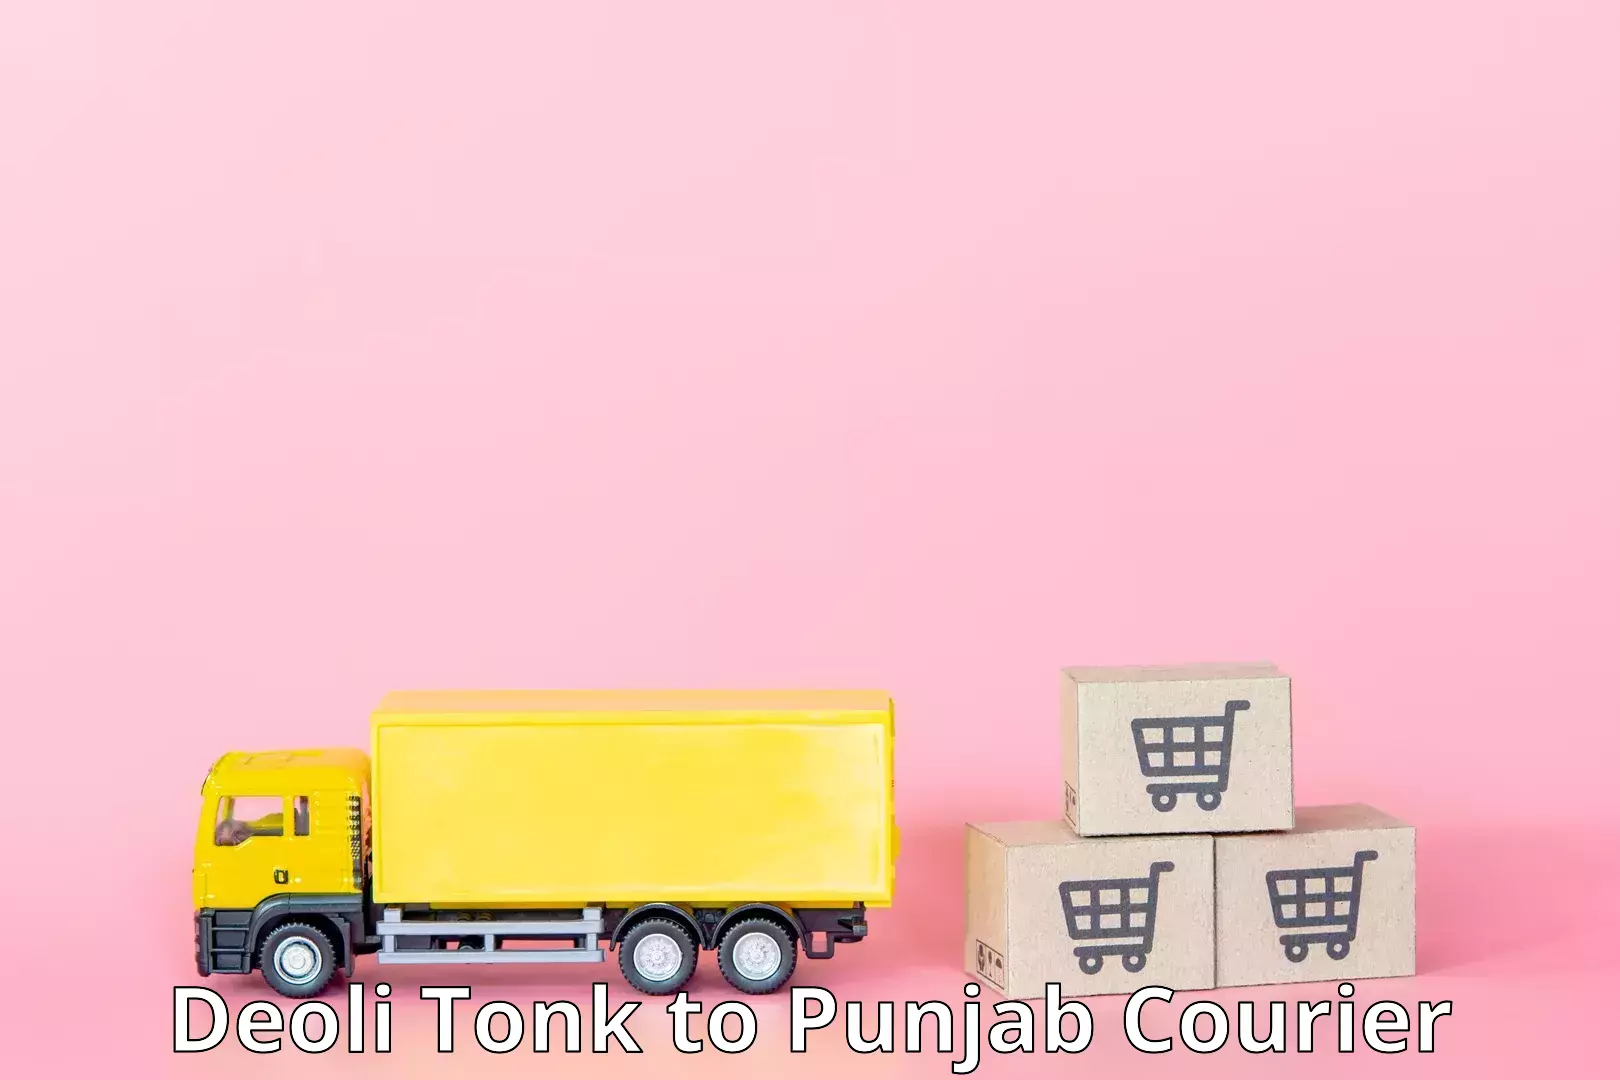 Advanced tracking systems in Deoli Tonk to Punjab